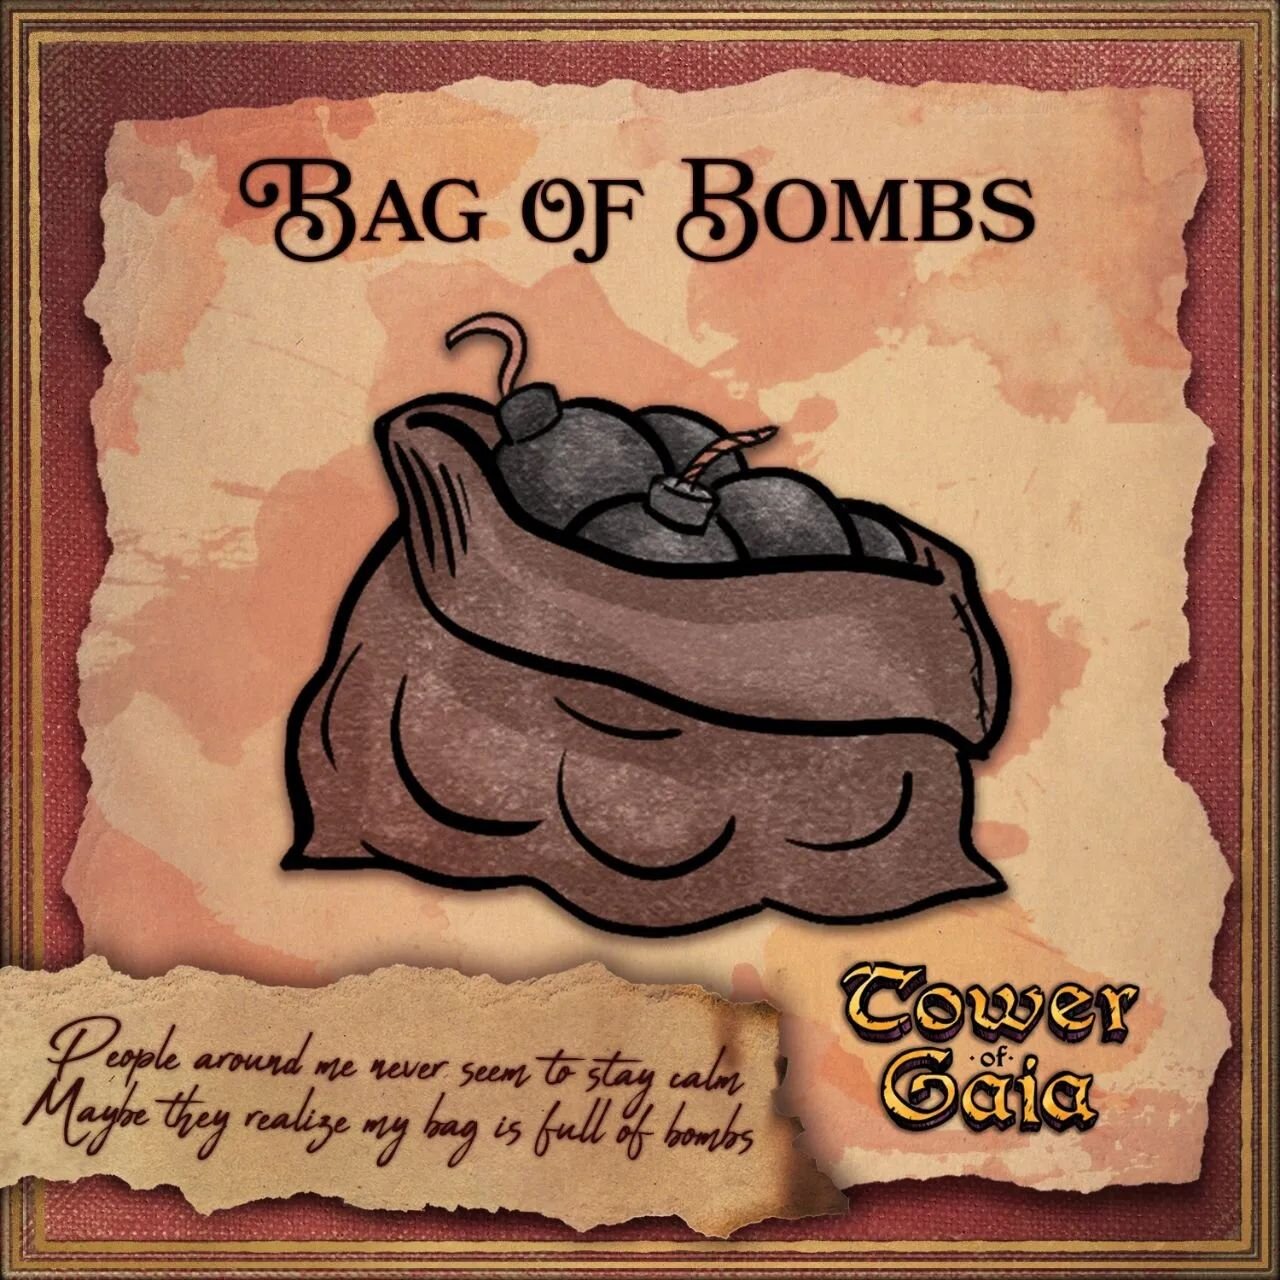 In Tower of Gaia the Bomb Bag will spawn special Bomb tiles on the board. After a certain number of turns they will explode, destroying nearby tiles and damaging enemies! 

You can learn more about Tower of Gaia at our website (link in bio!), and if 